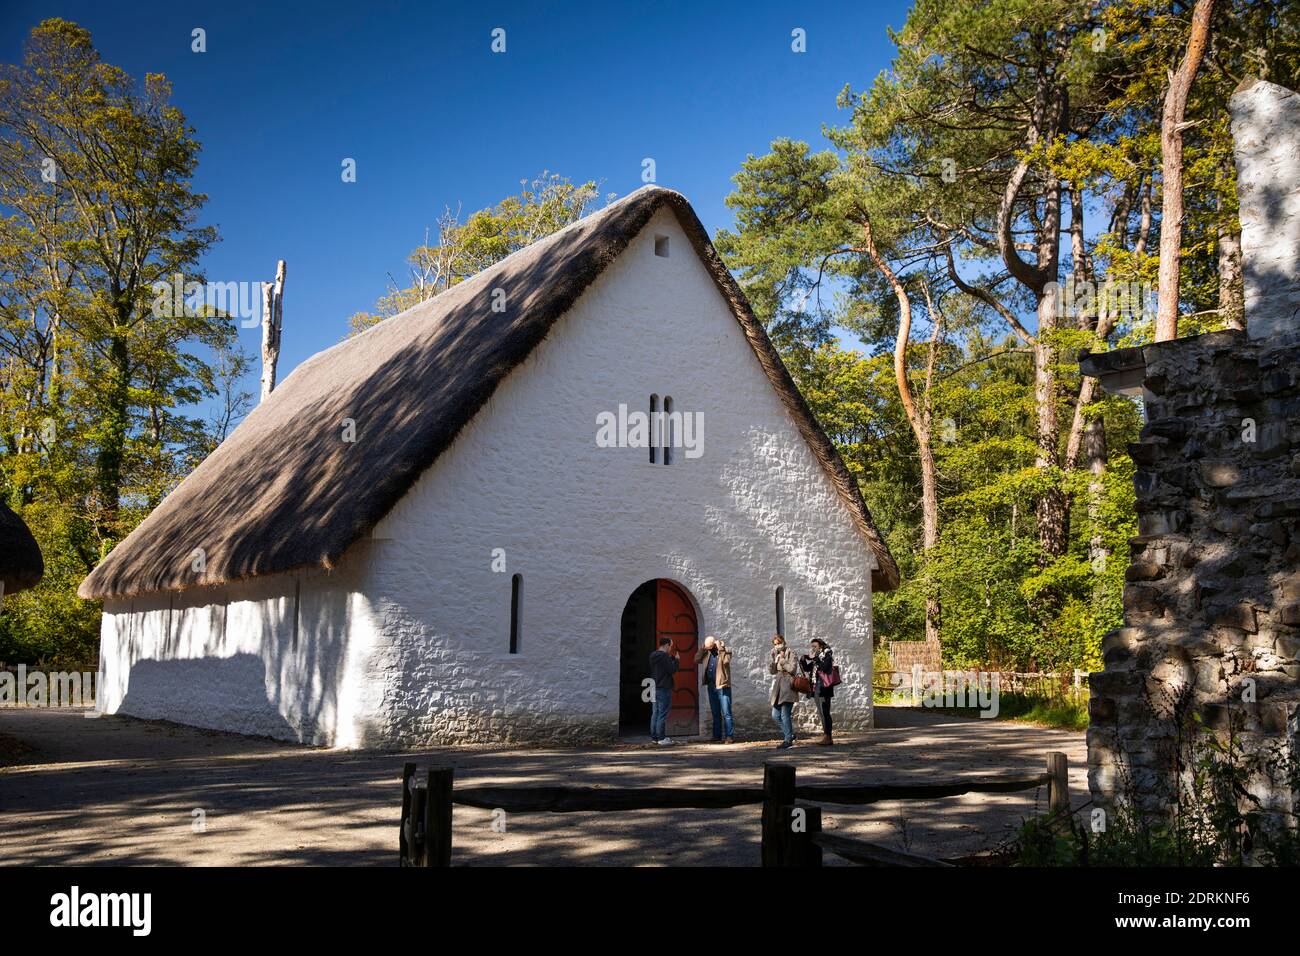 UK, Wales, Cardiff, St Fagans, National Museum of History, Llys Llewellyn, reconstruction of Medieval Court of princes of Gwynedd, exterior Stock Photo